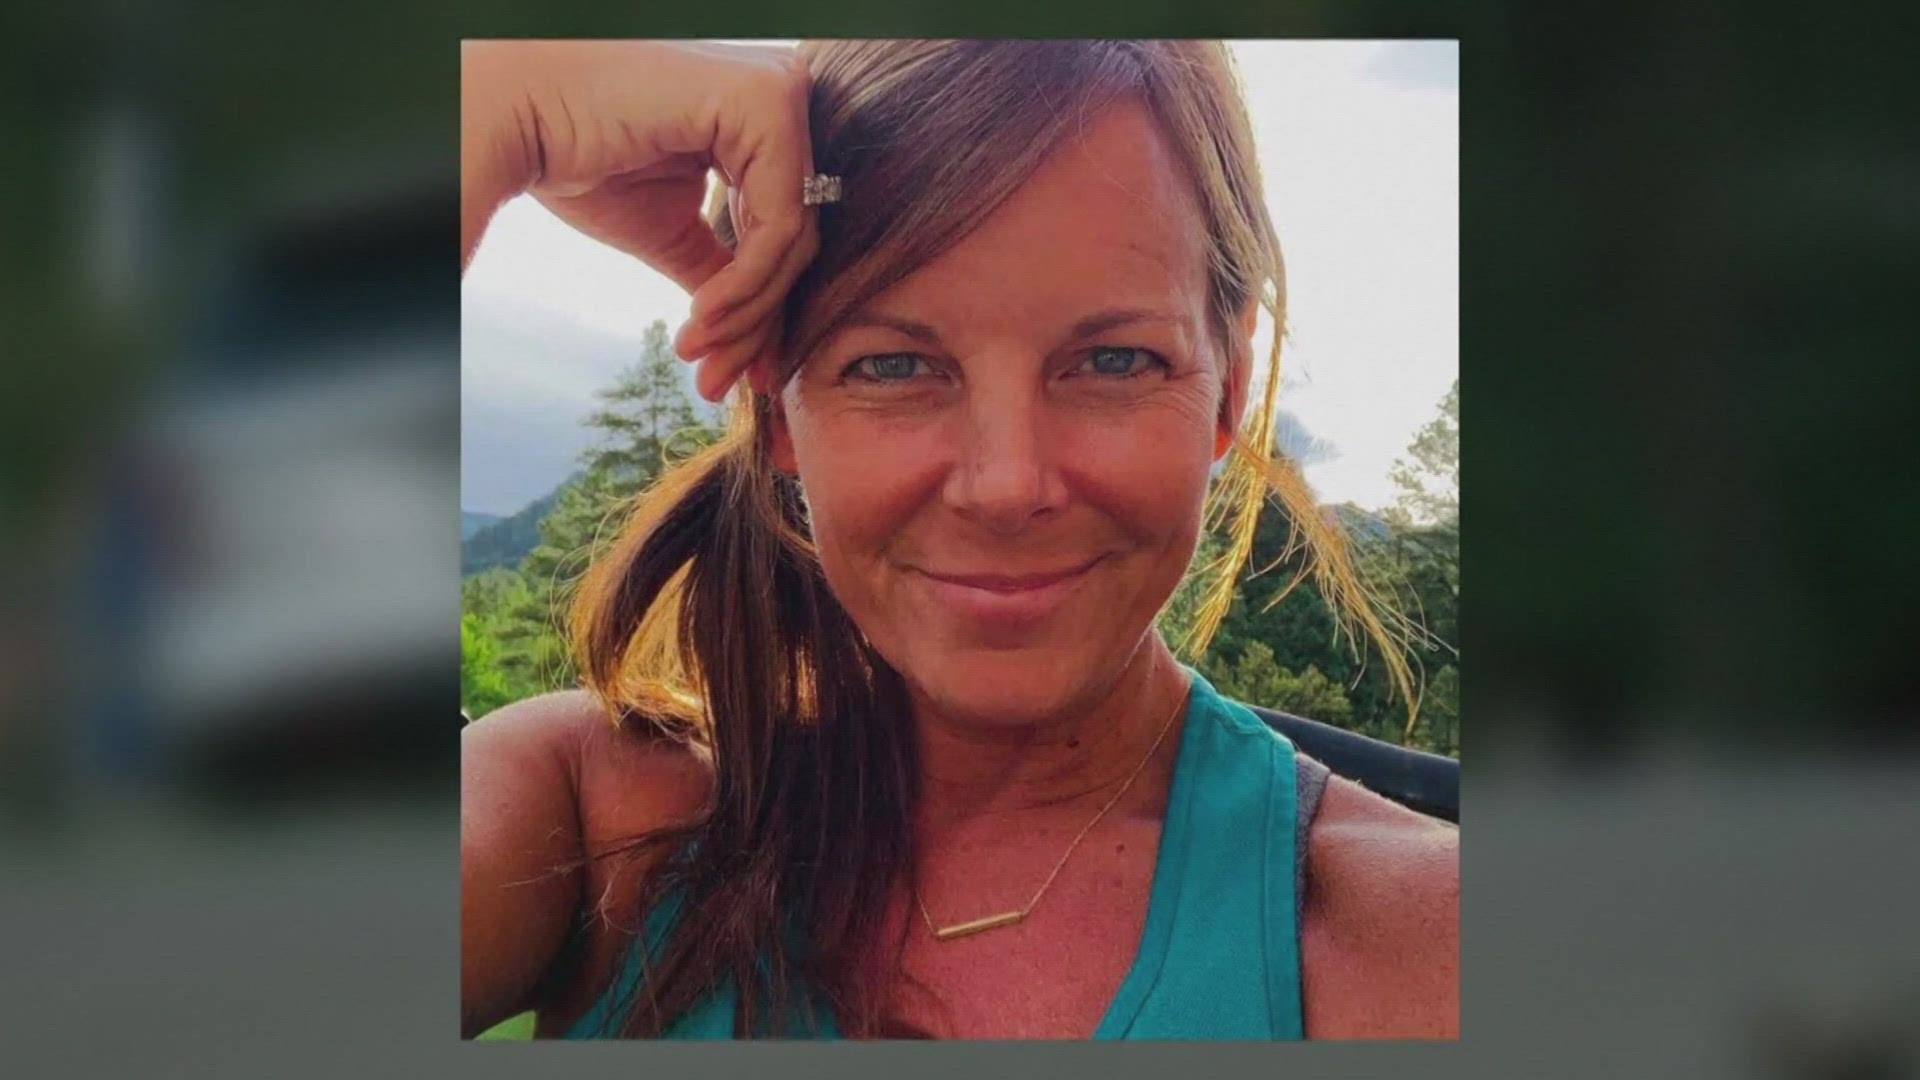 Morphew, a 49-year-old mother of two who grew up in Madison County, went missing in May 2020 from her home.